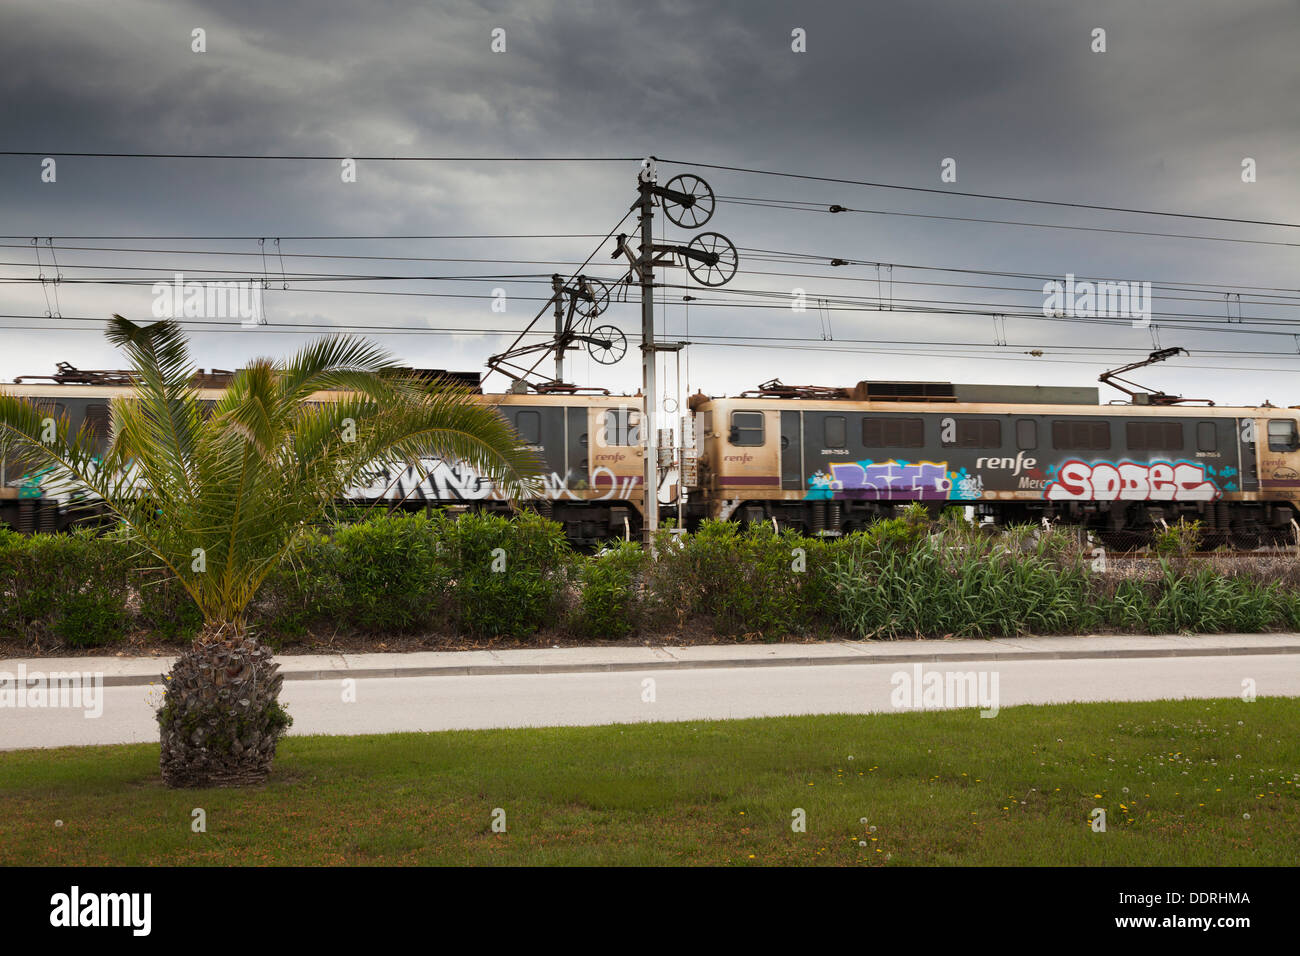 grafiti covered renfe train with overhead power lines Stock Photo